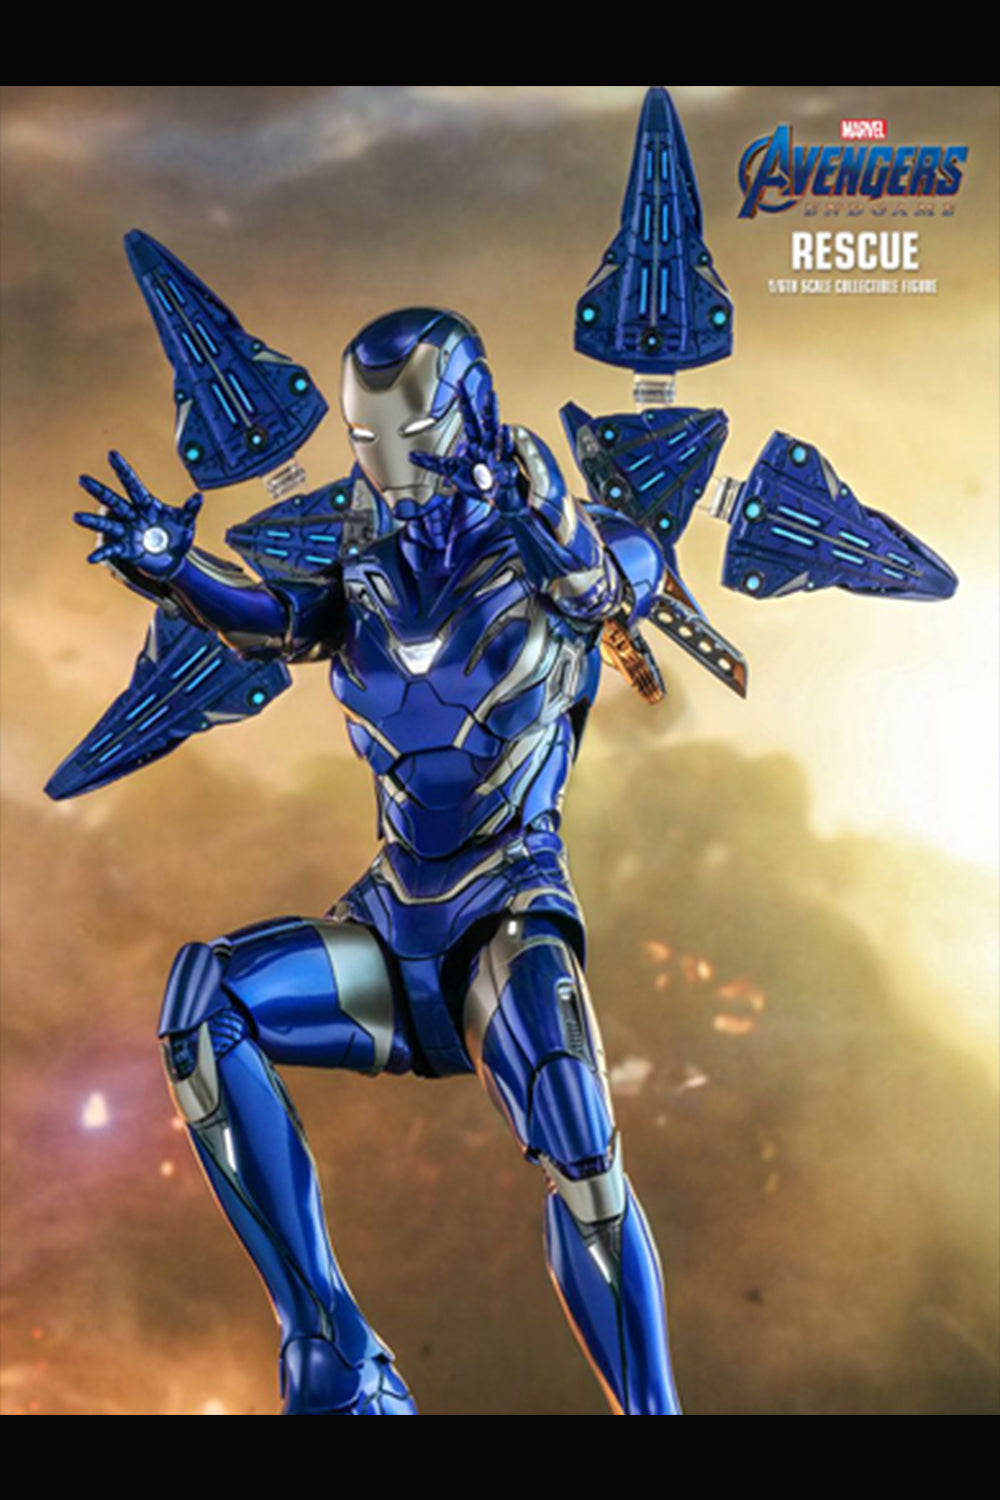 HOT TOYS MARVEL AVENGERS ENDGAME: RESCUE 1/6TH SCALE COLLECTIBLE FIGURE - MMS538D32 - Anotoys Collectibles